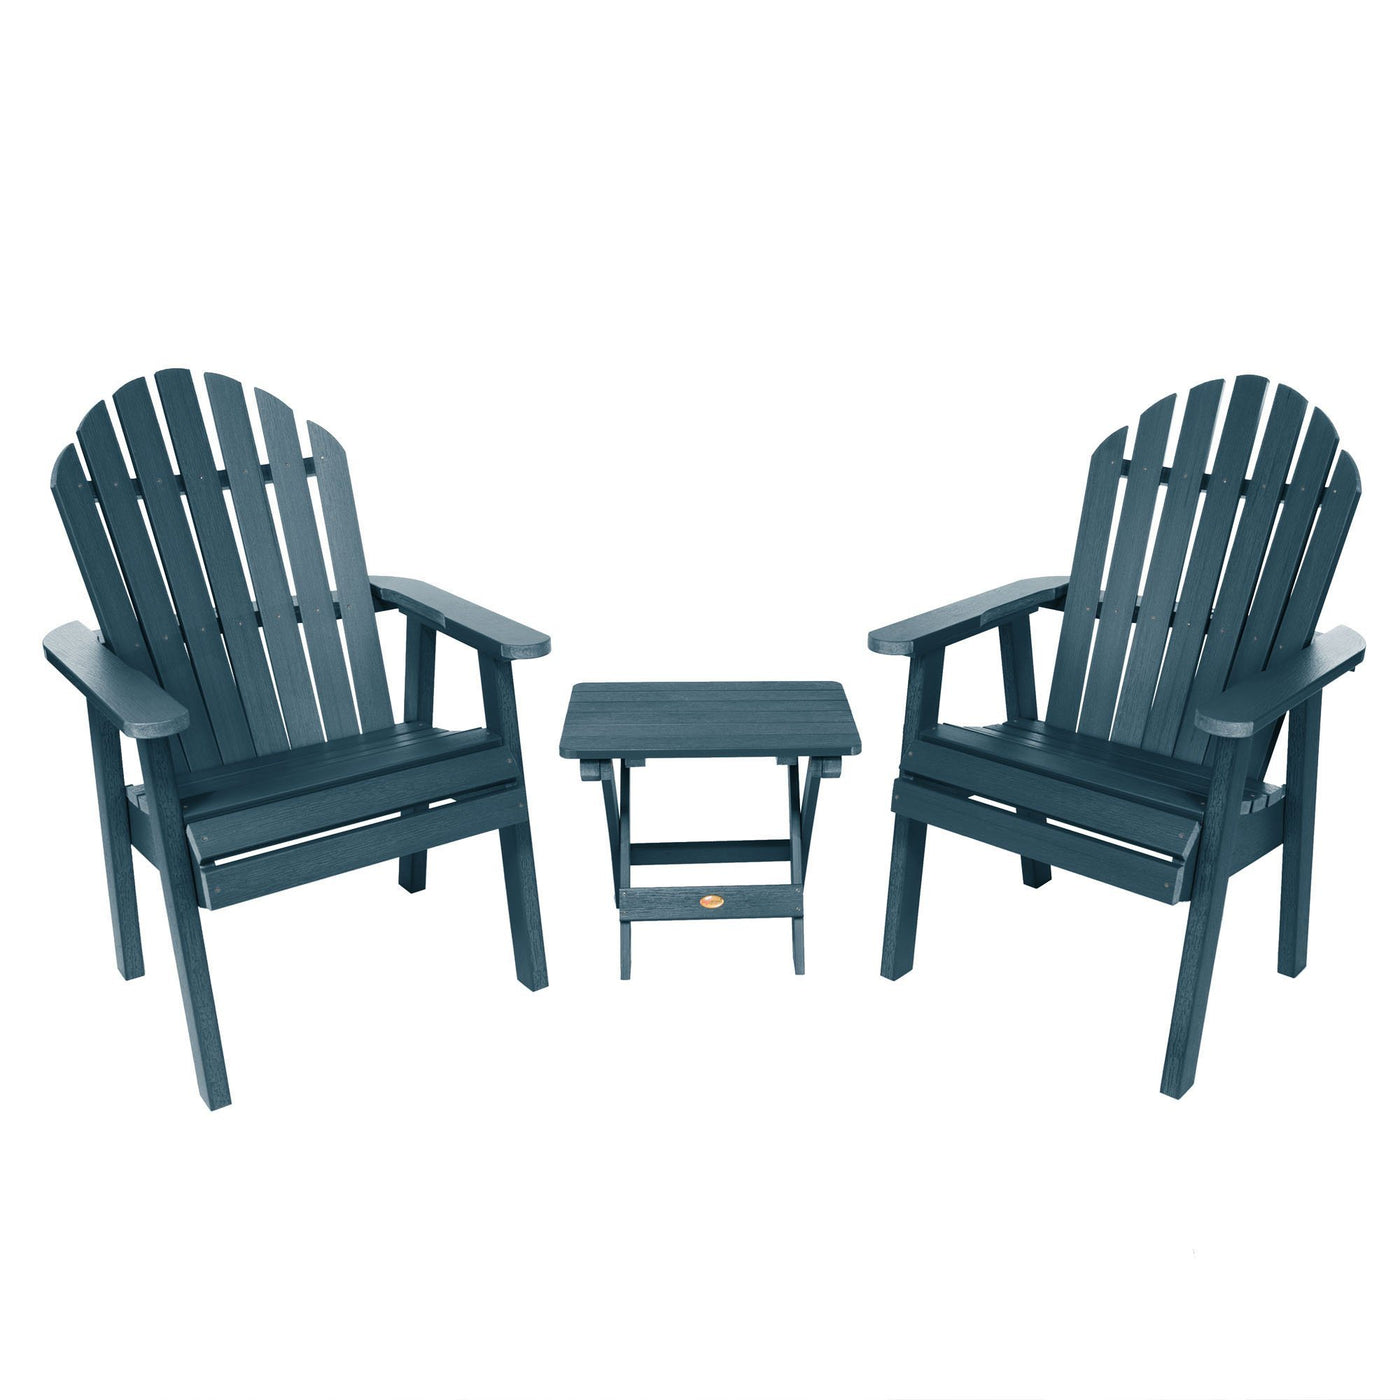 2 Hamilton Deck Chairs with Folding Side Table Highwood USA Nantucket Blue 